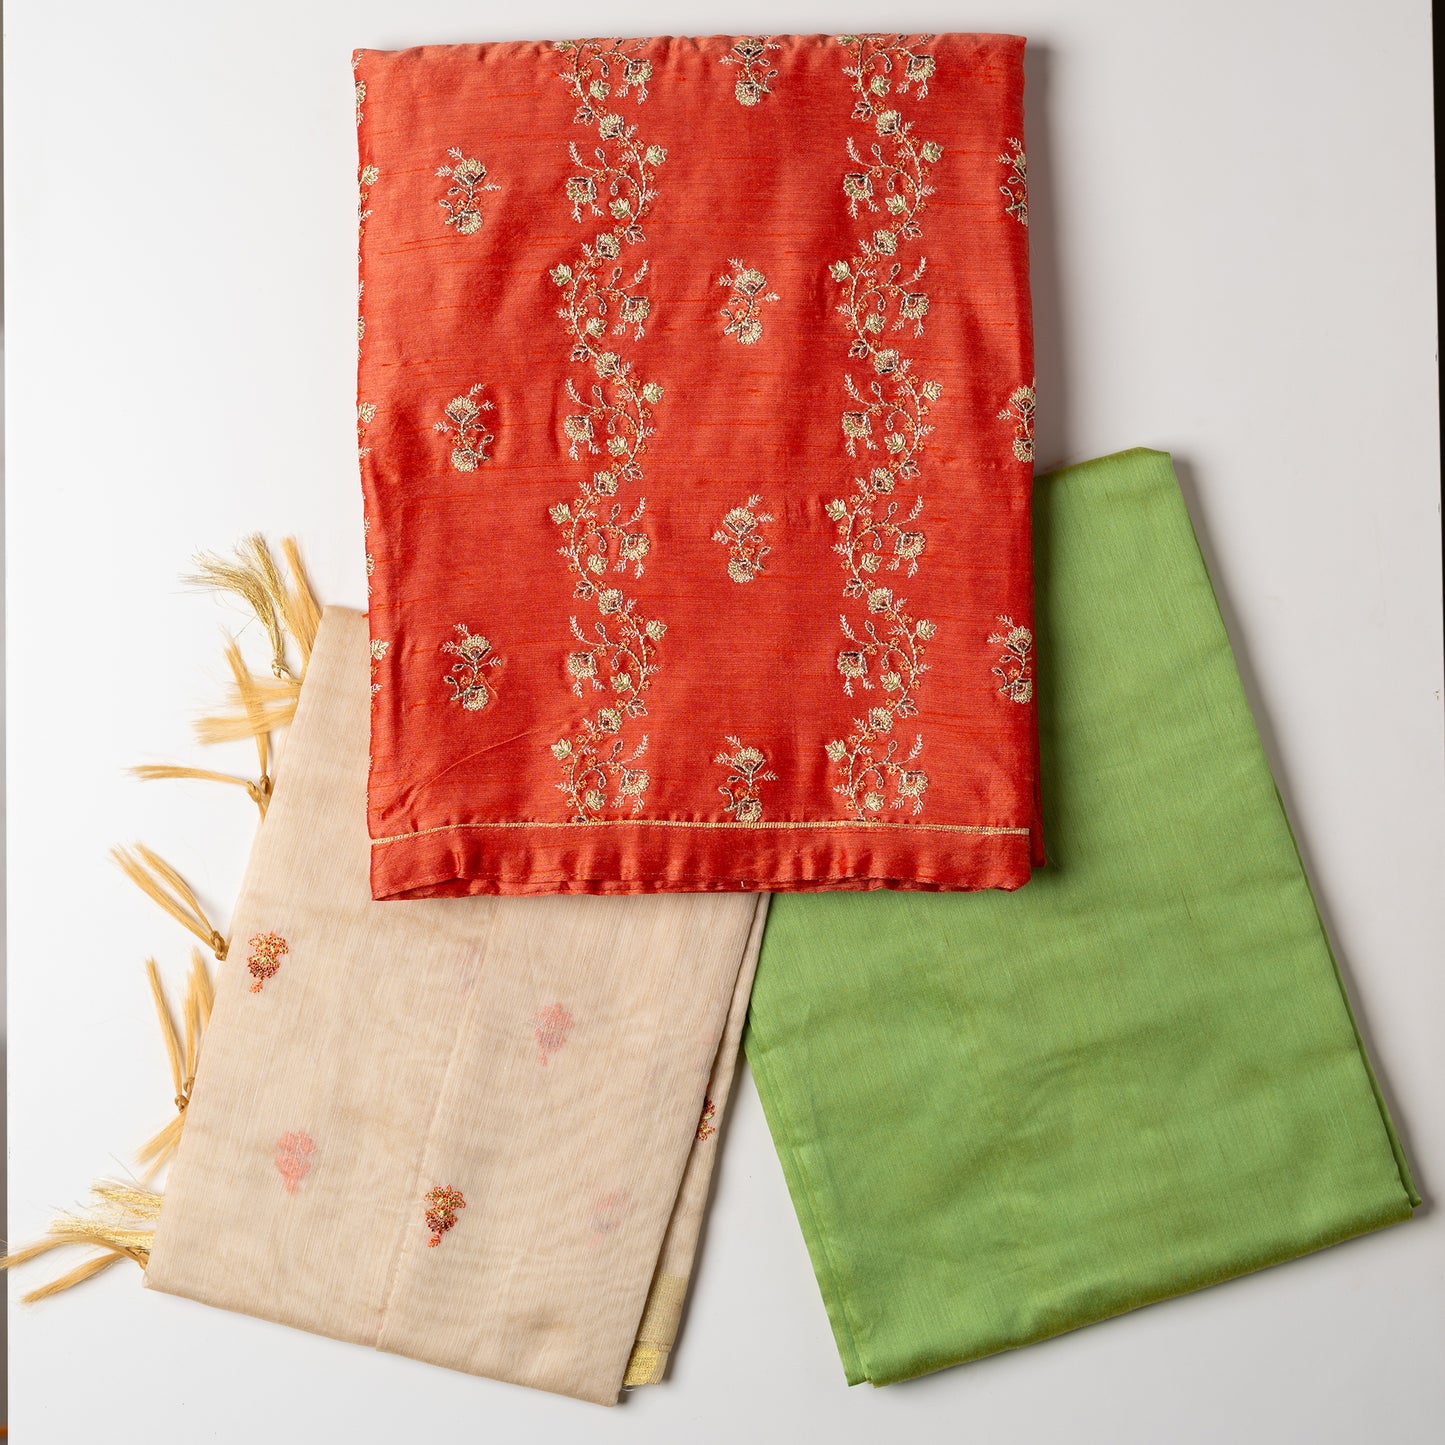 images of top , bottom and dupatta in folded style, Unstitched chanderi silk dress material set, peach color chanderi silk top with embroidery work, cream color chanderi silk dupatta with embroidery work, parrot green color cotton silk bottom